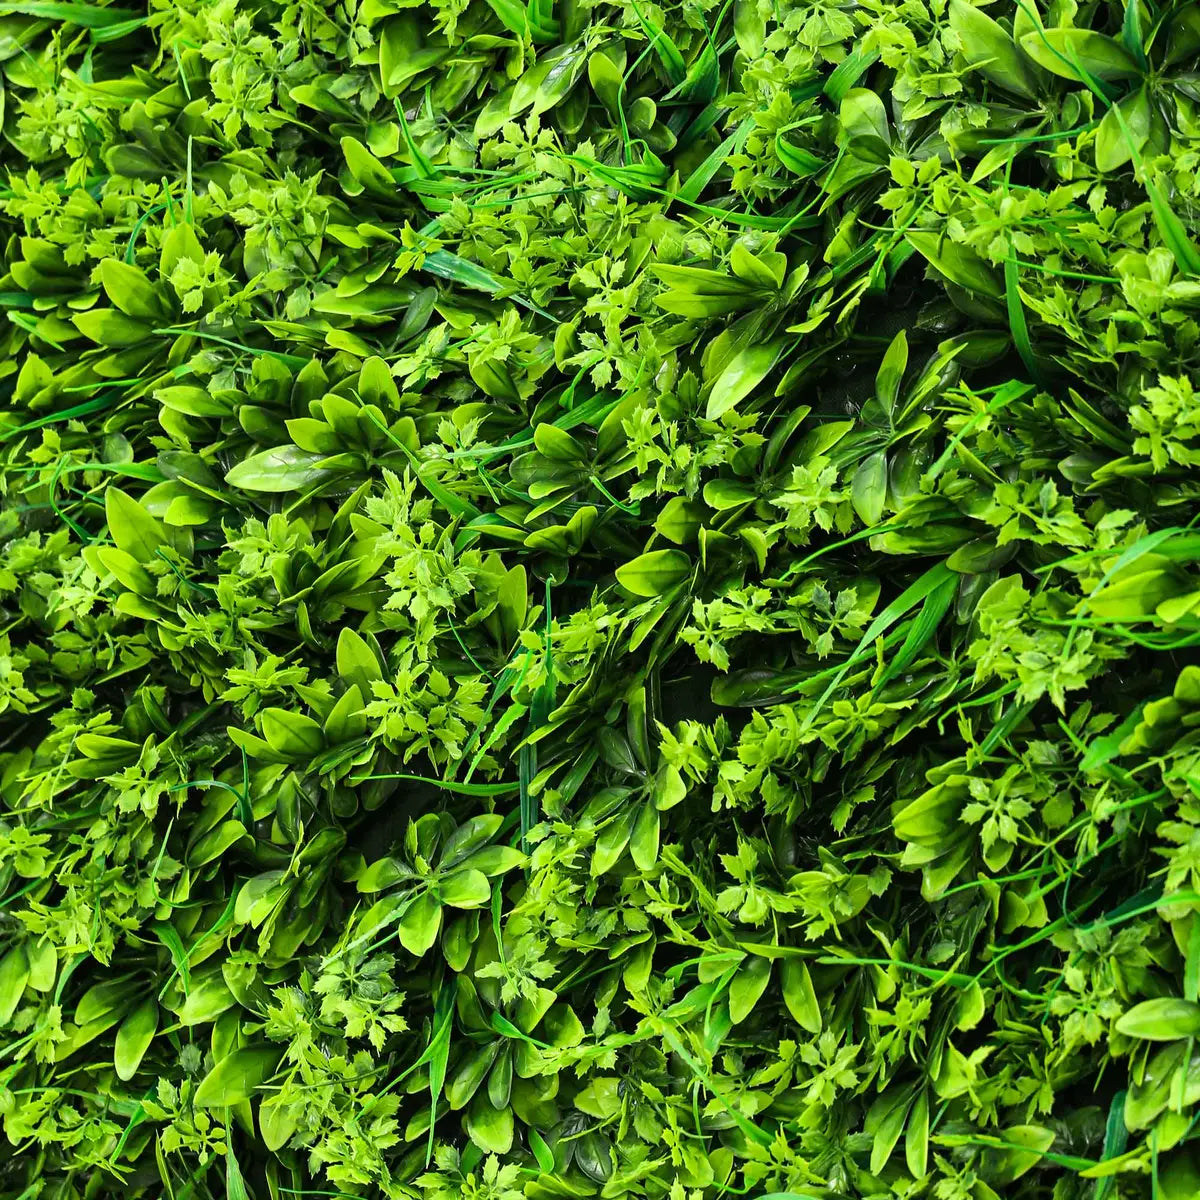 The green grass wall detailed view shows off vivid colors and a realistic fabric backing.